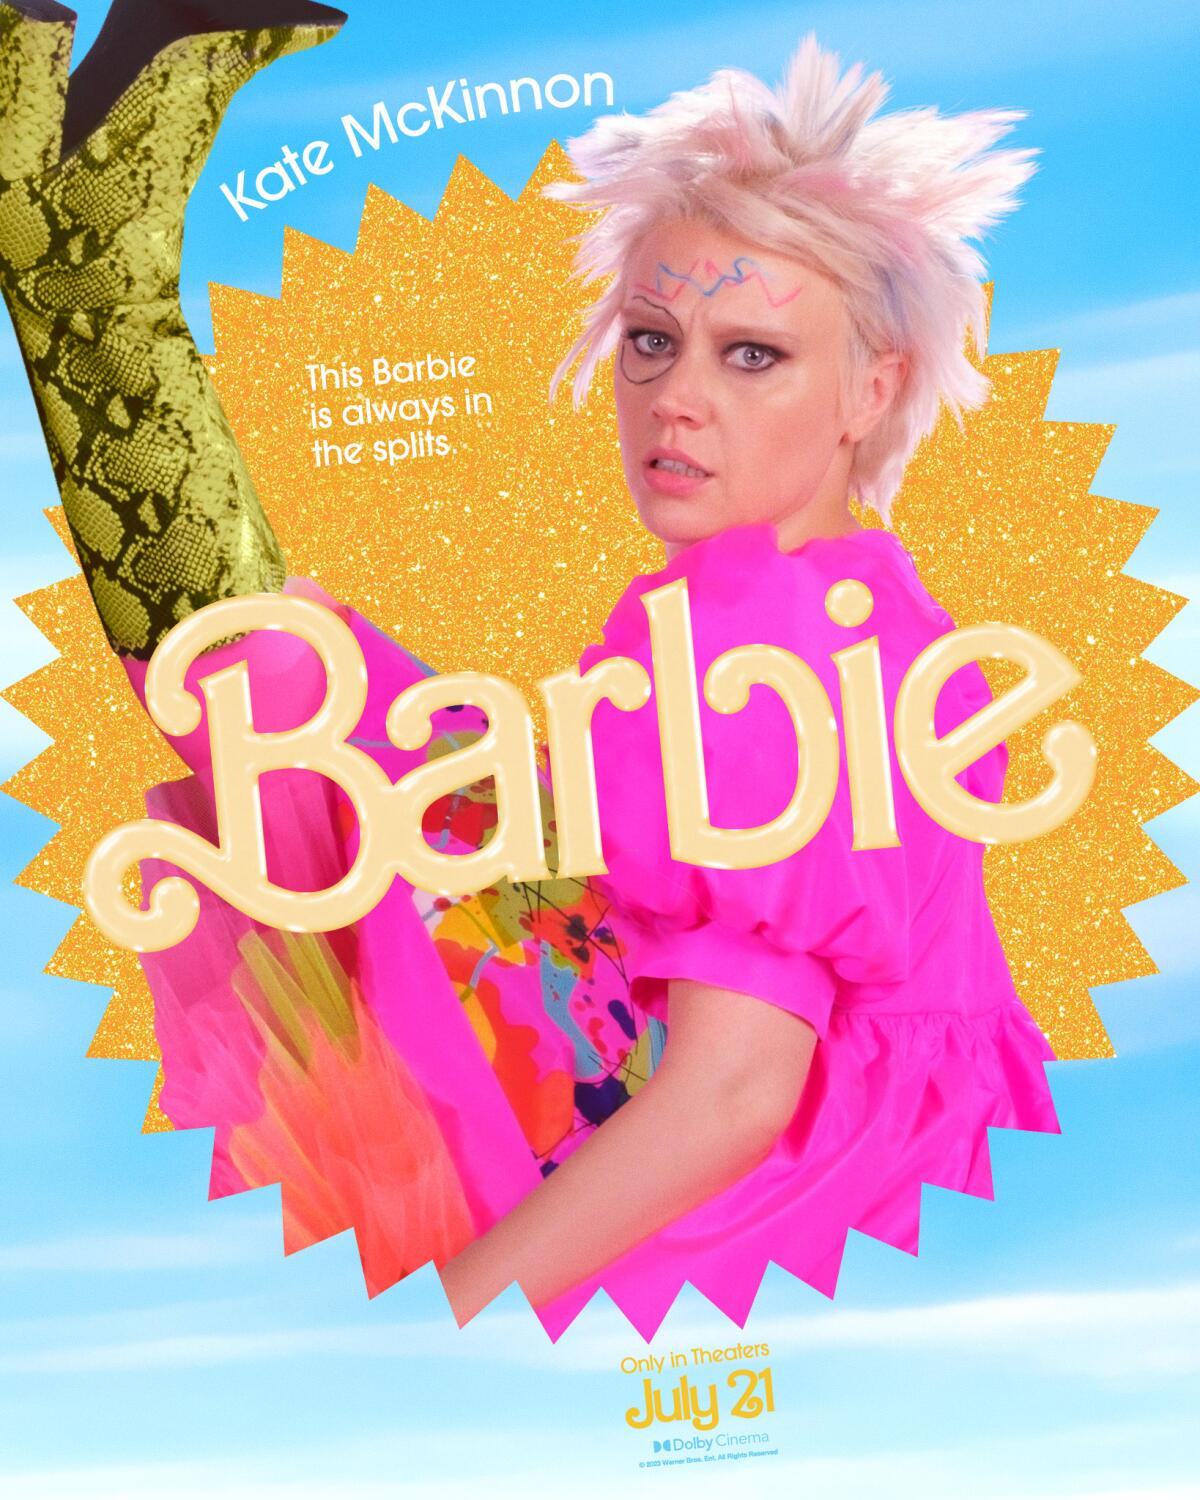 Kate McKinnon kicks her leg up high in a "Barbie" movie poster. She wears snakeskin boots, a spiky white wig and a pink dress